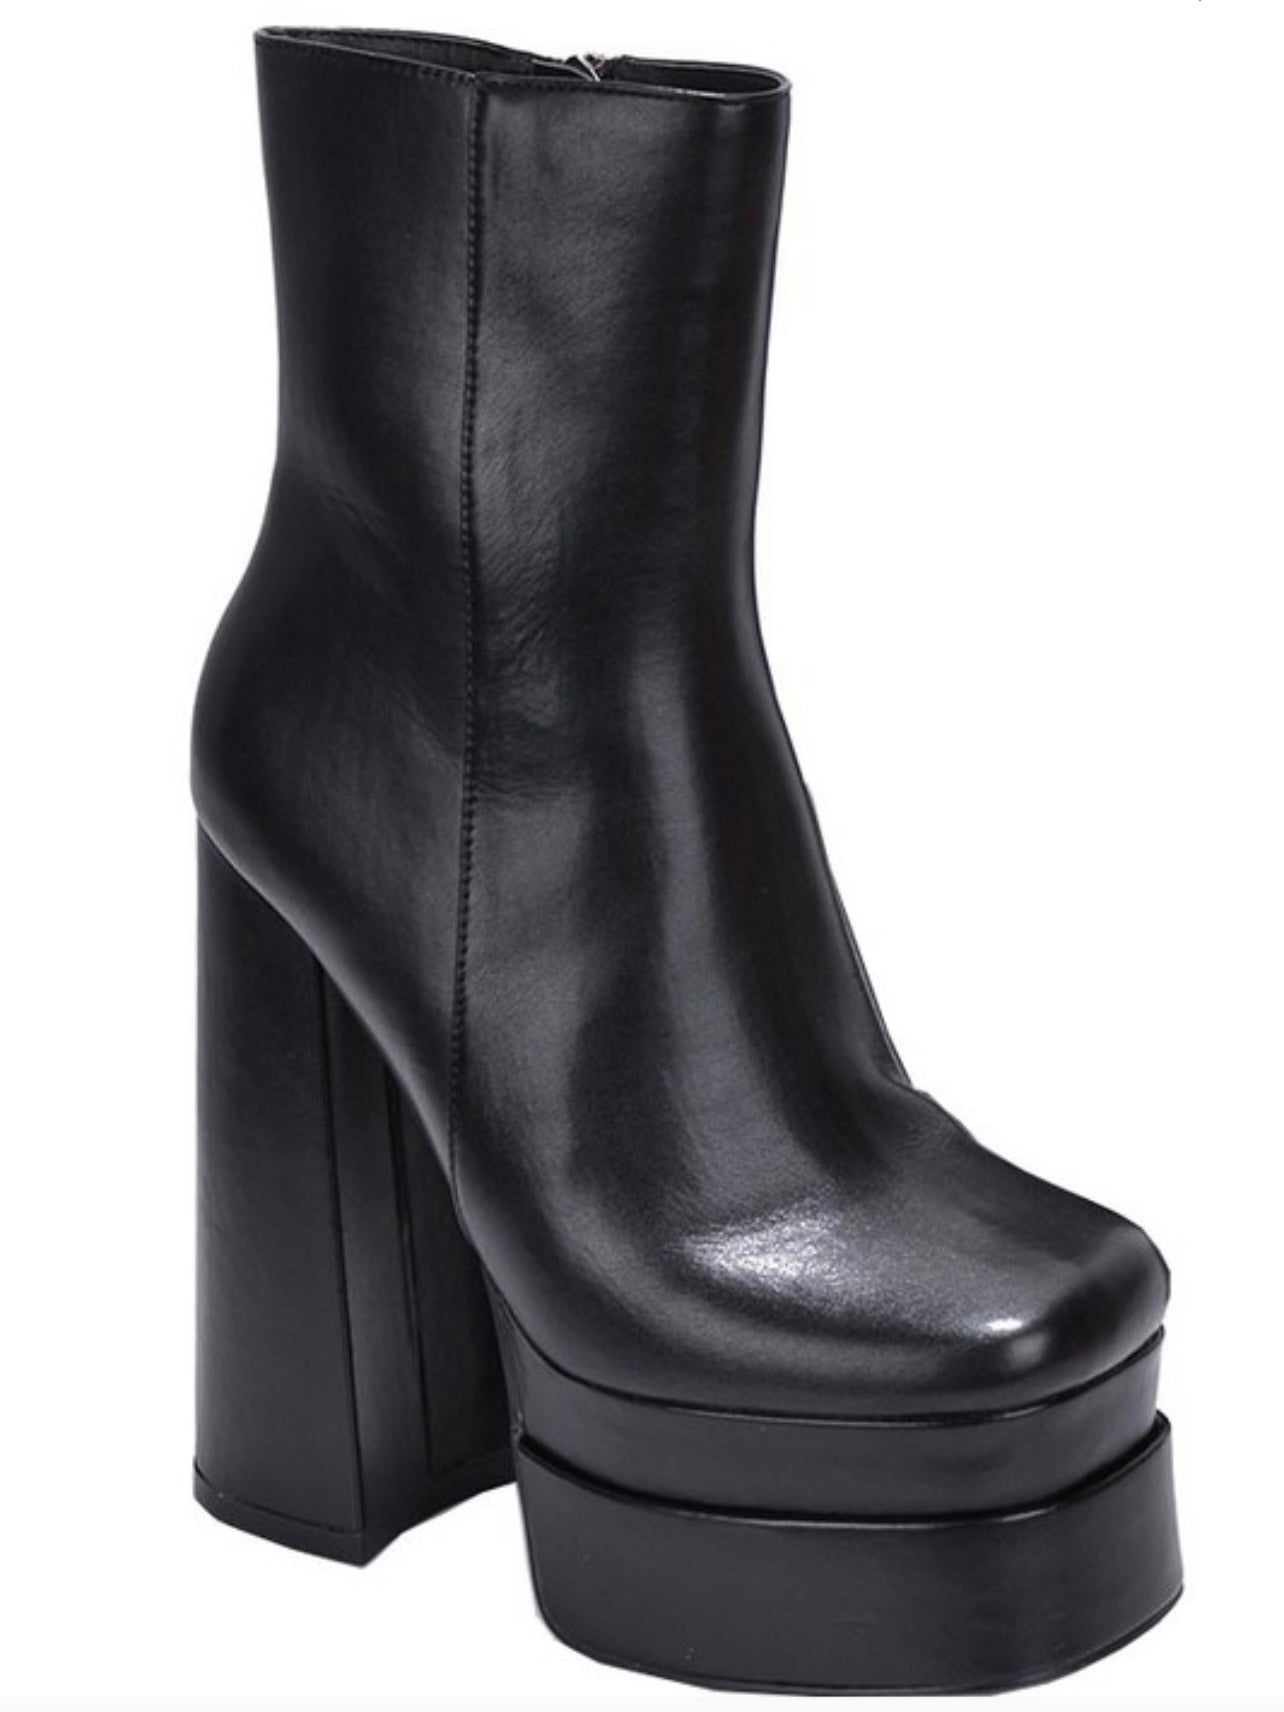 "Perfect Black Bootie" Ankle Boot